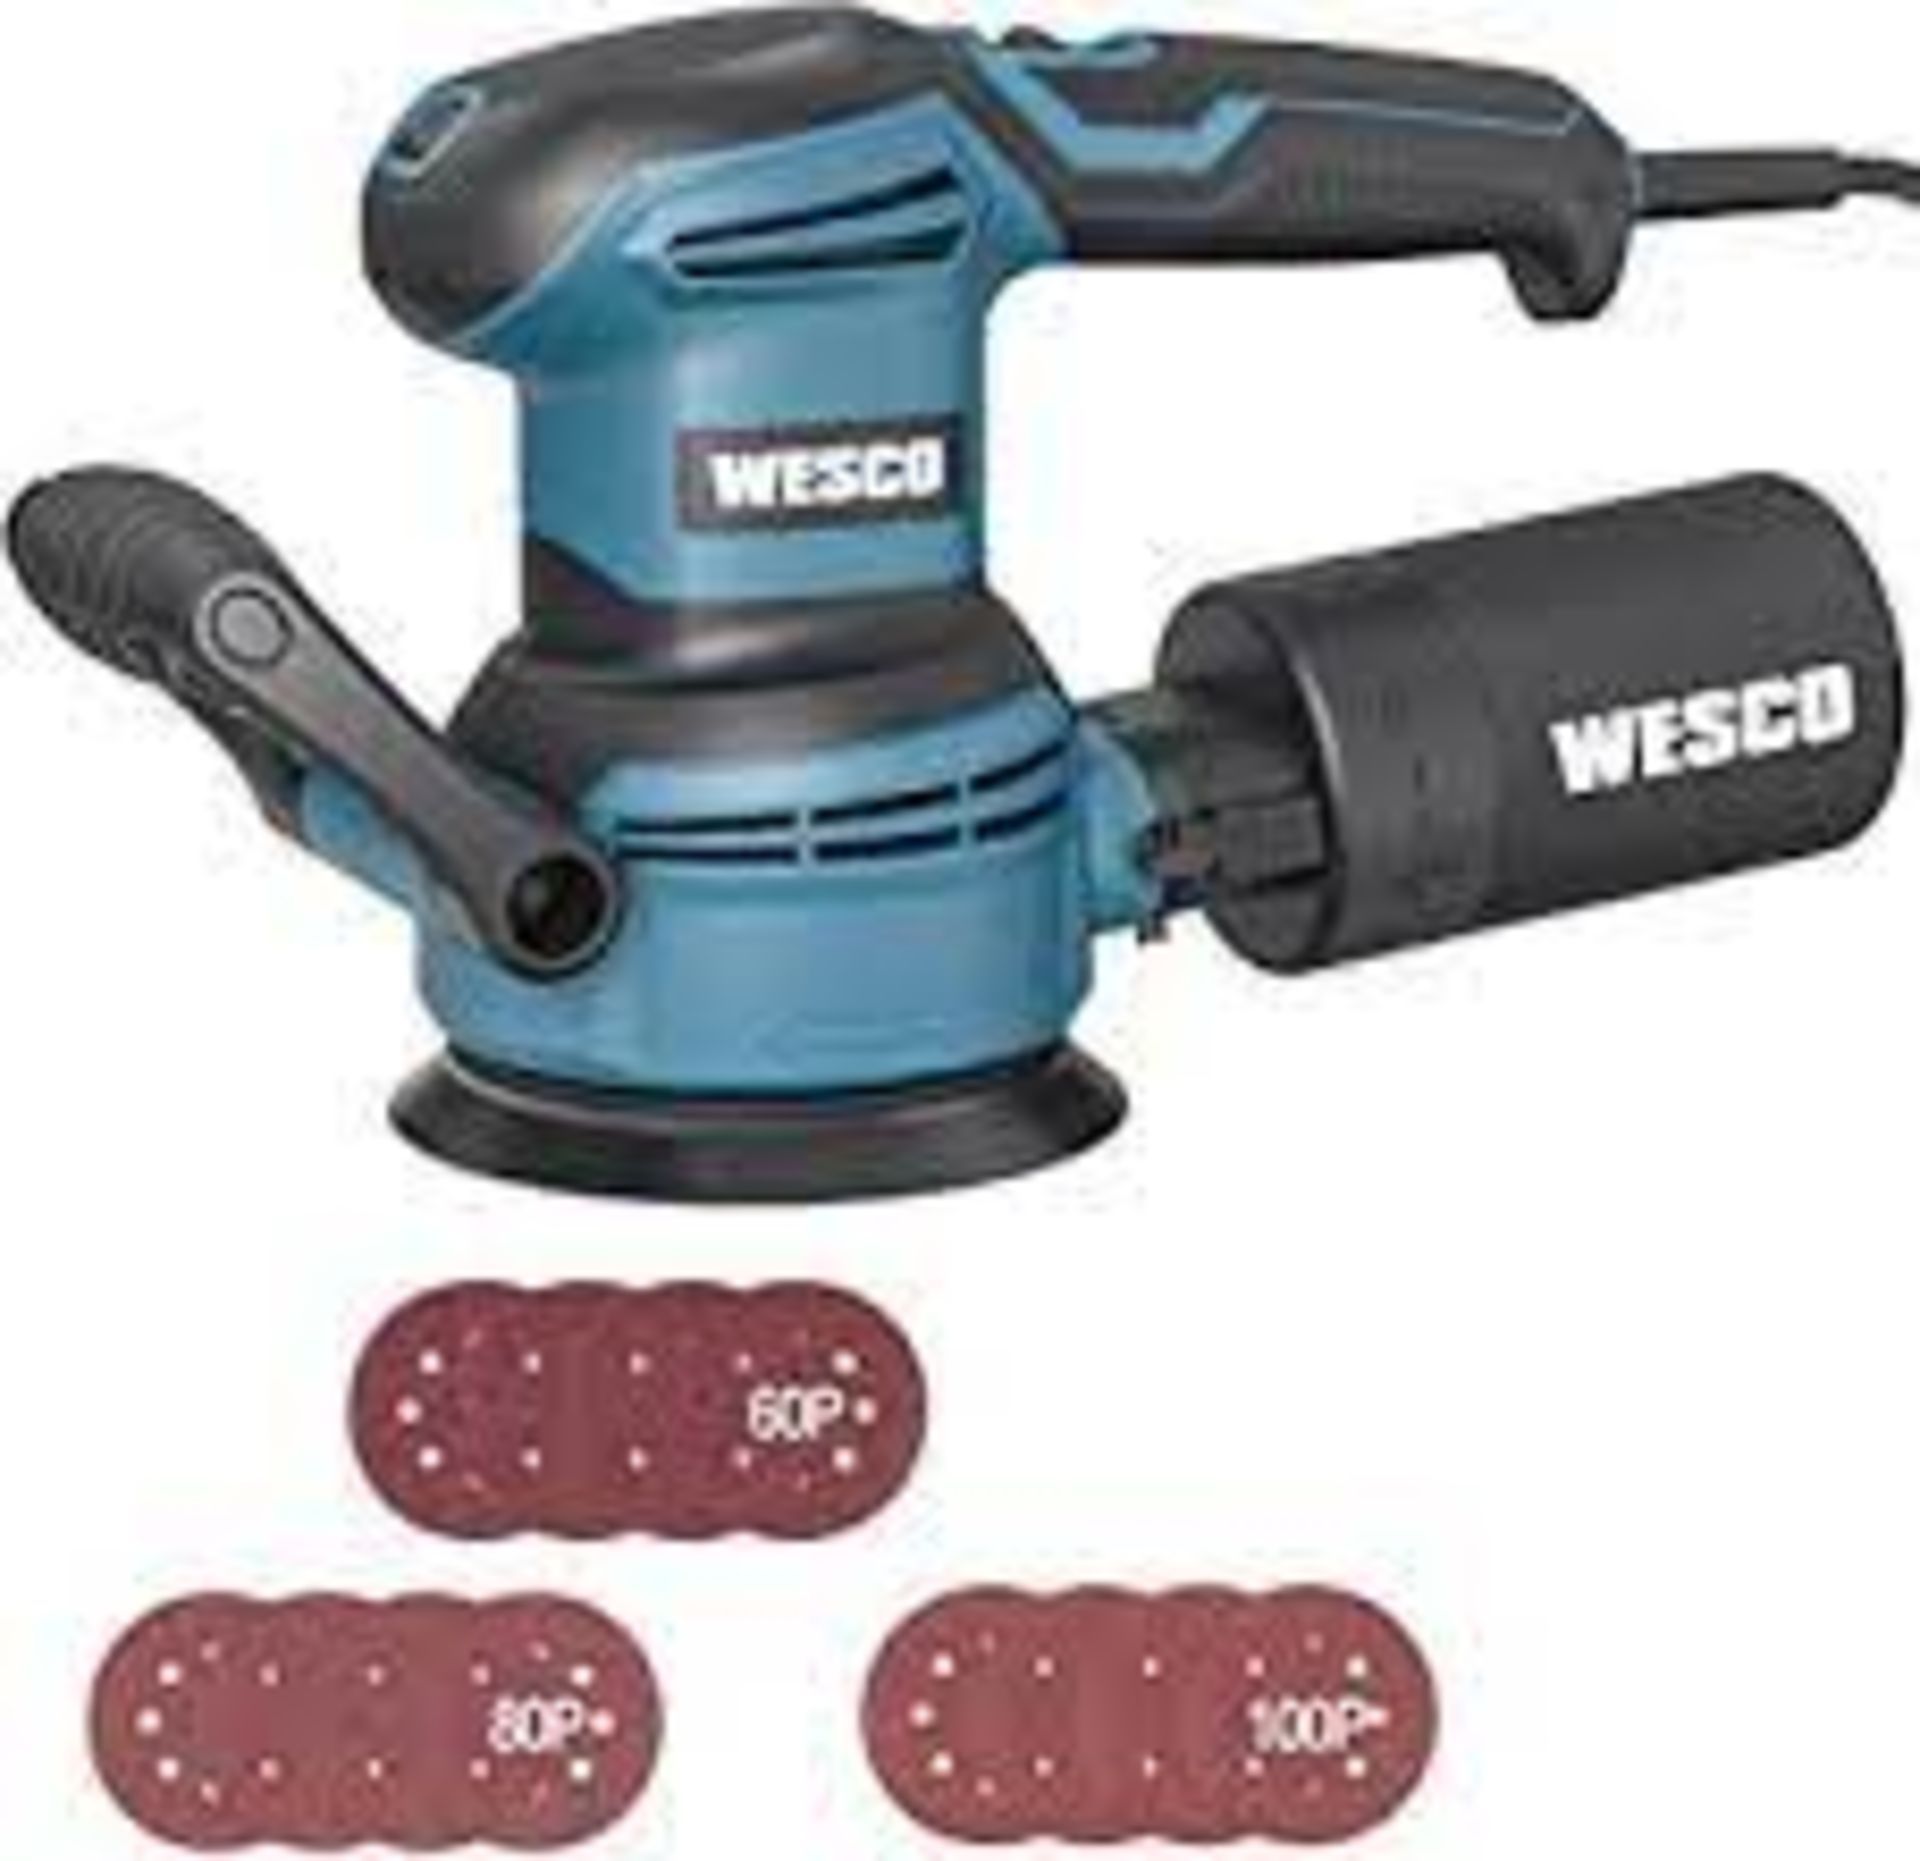 2 X NEW BOXED WESCO 400W 12000RPM 125mm Random Orbital Sander with 12Pcs Sandpapers, 6 Variable